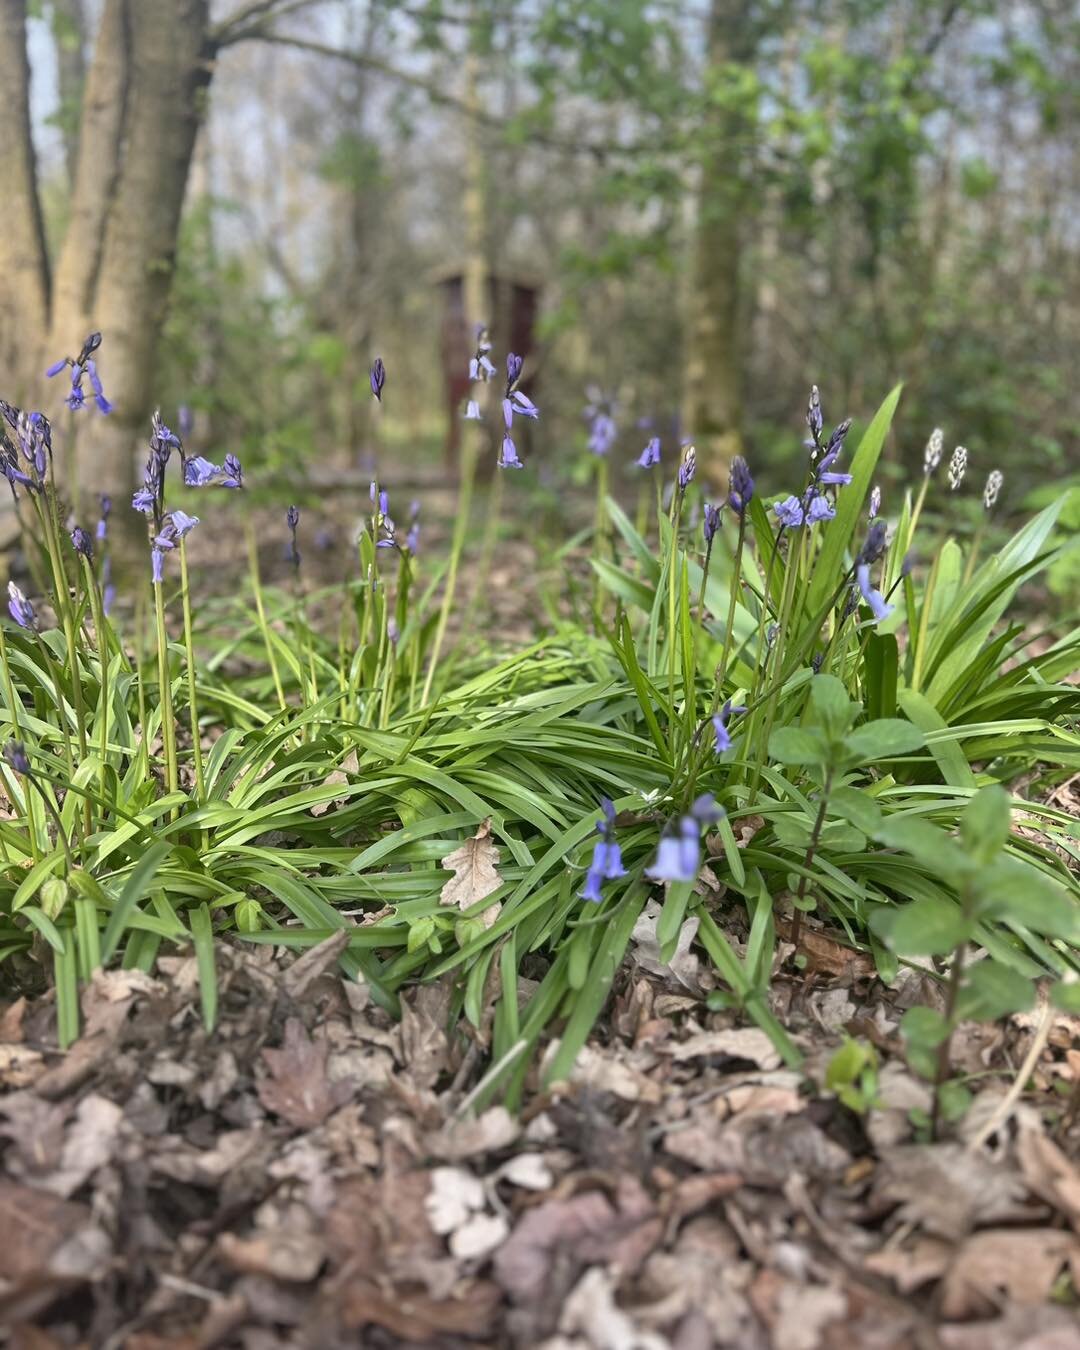 Spring has officially sprung!! 

&amp; our beautiful bluebells are here to tell us just that! 🌿

So with THREE bank holidays coming up in May we hope you decide to spend some of your time 

A) Outdoors
B) On An Adventure 
C) Making Memories 

&amp; 